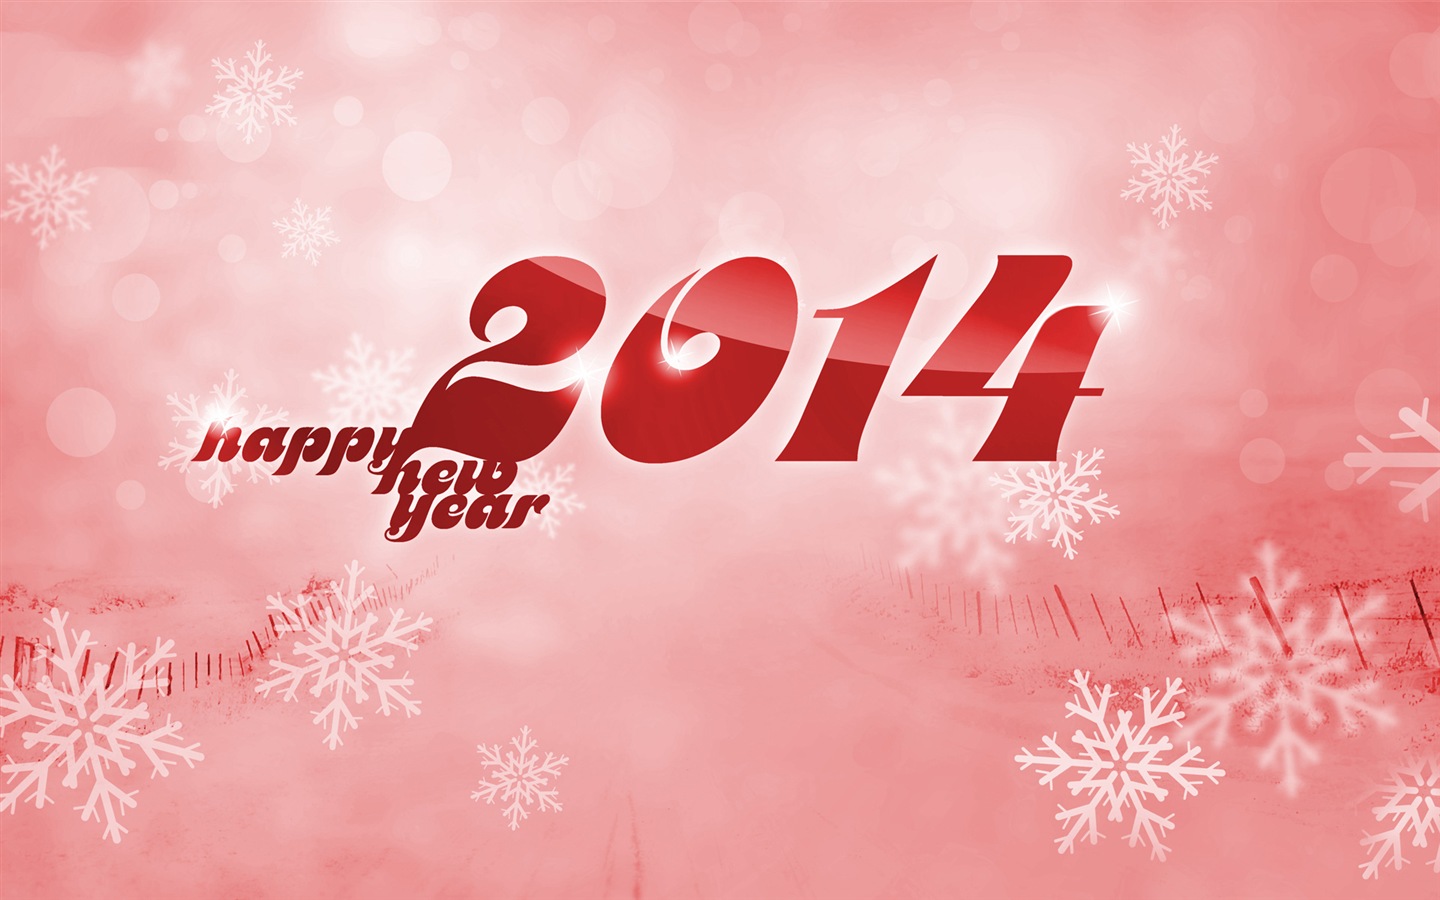 2014 New Year Theme HD Wallpapers (1) #12 - 1440x900